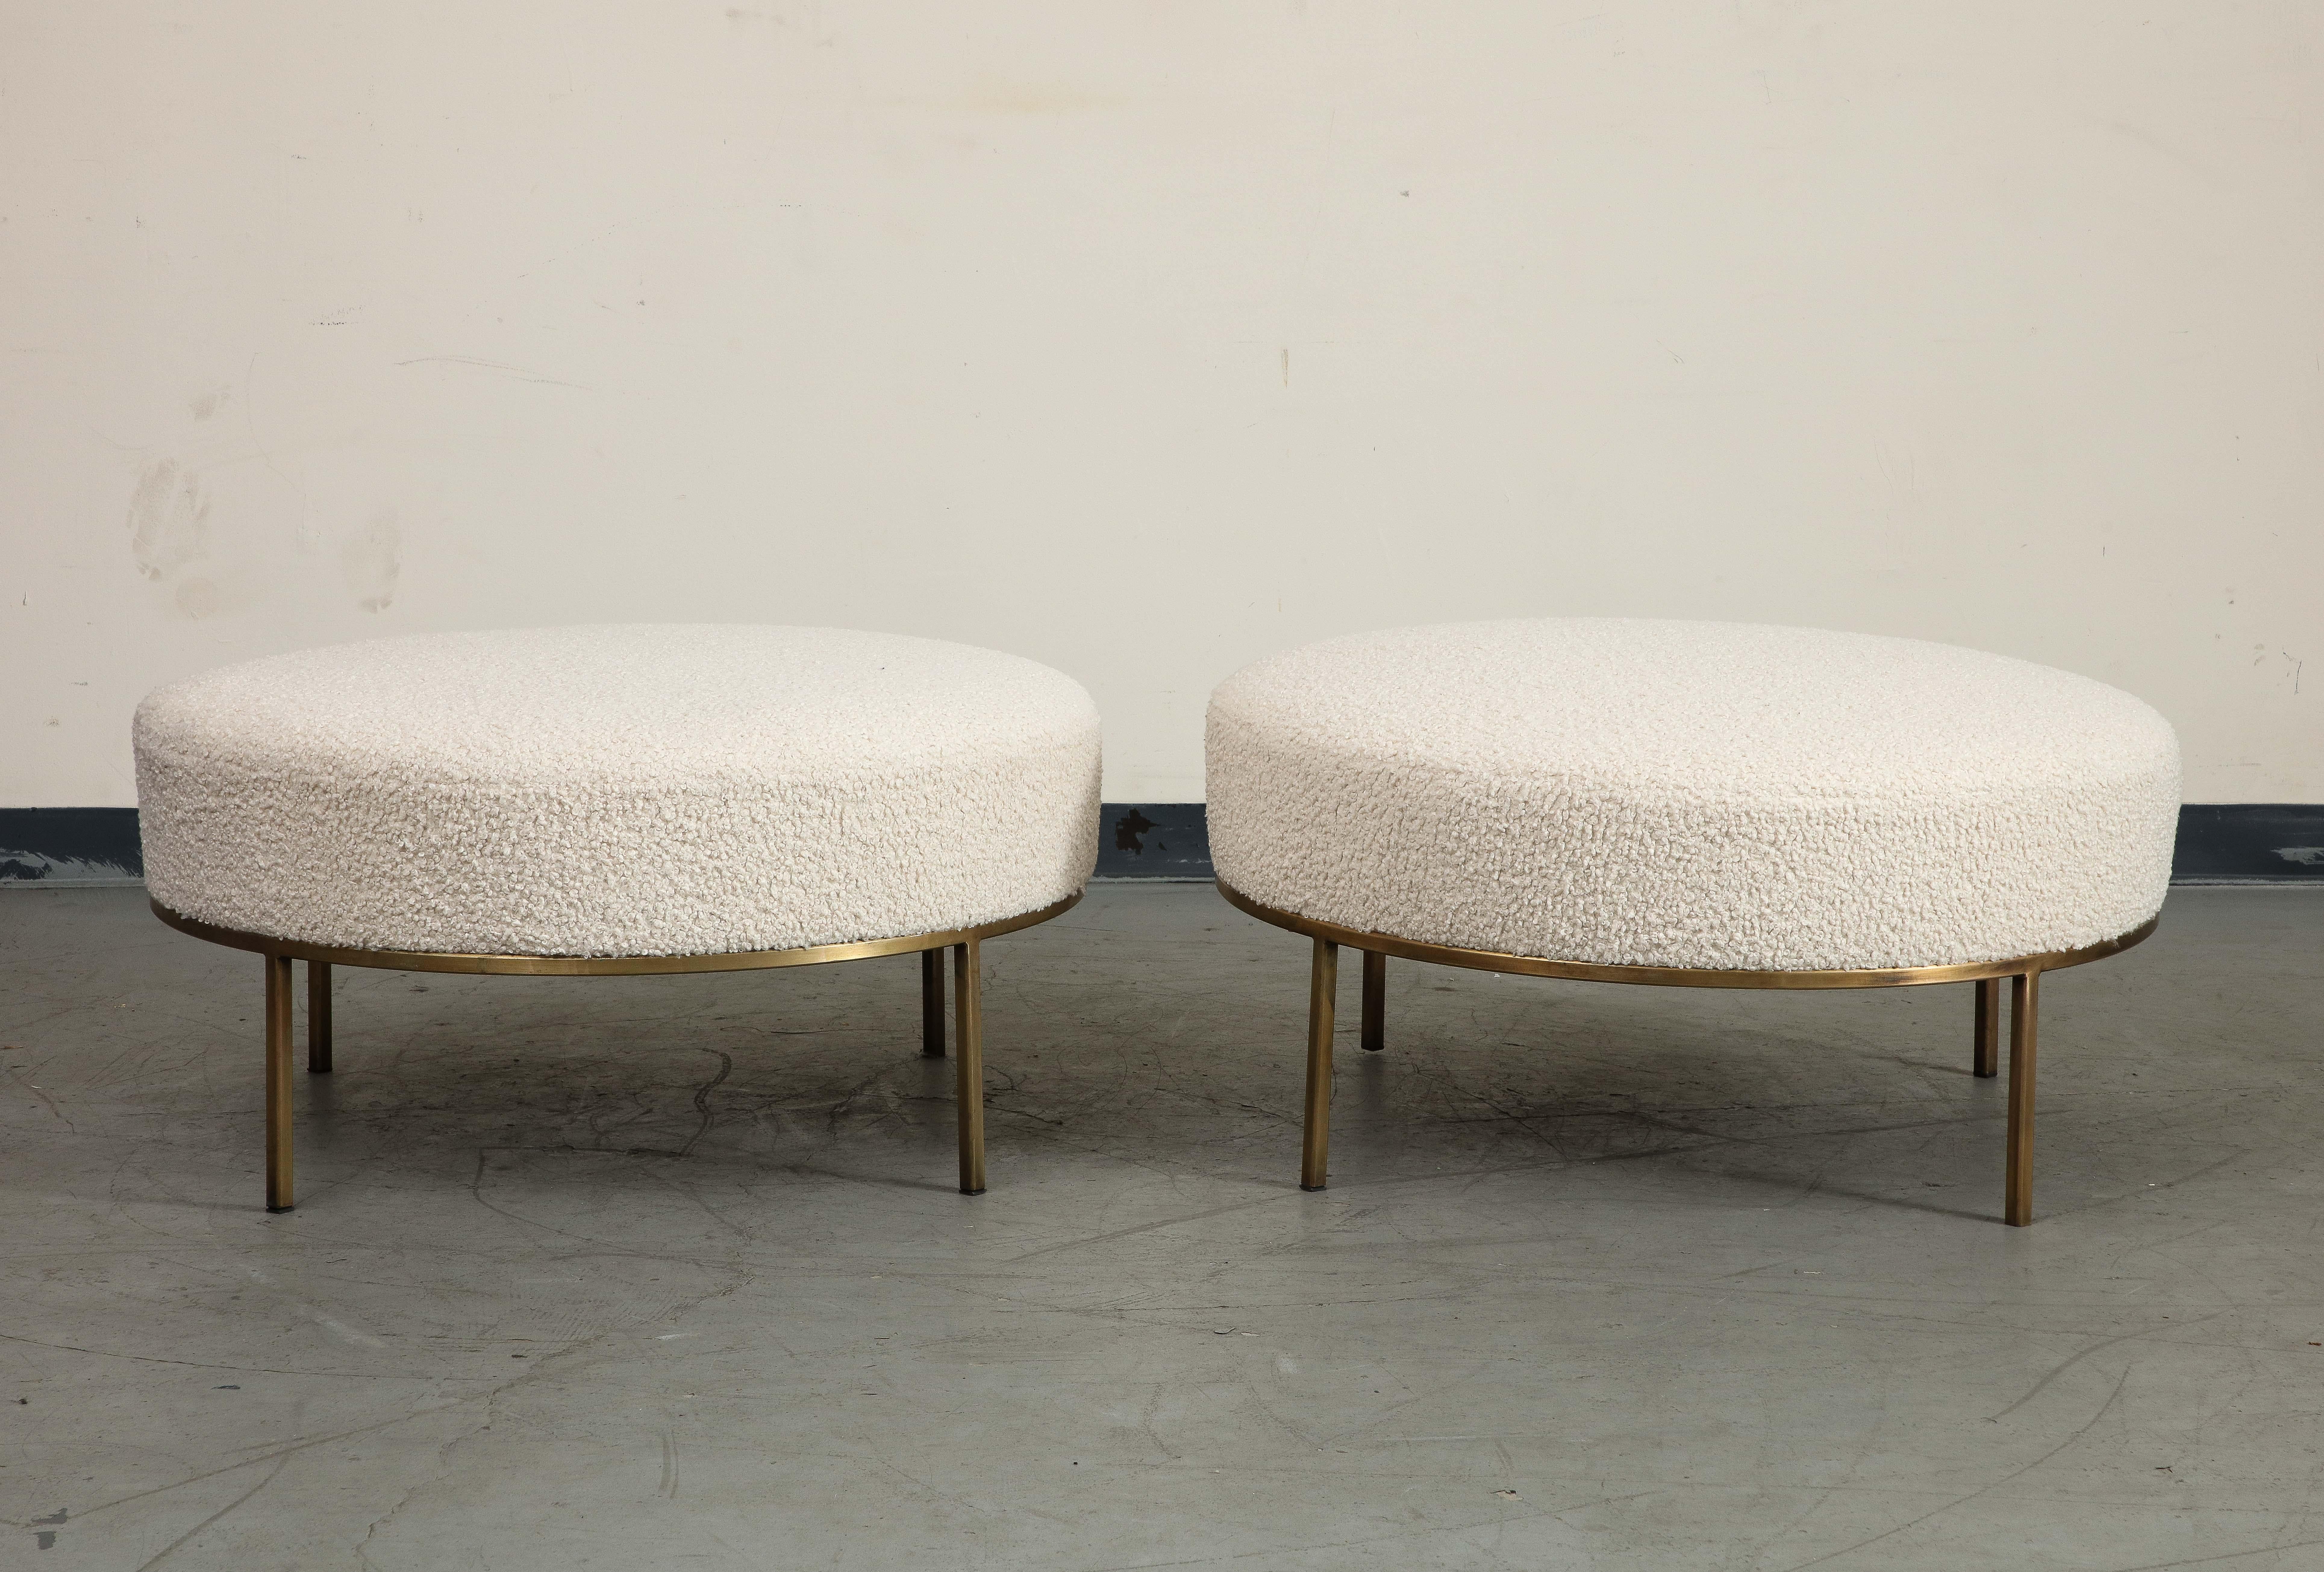 Pair of contemporary Chautauqua Round Ottomans by Amber Lewis, handmade in Los Angeles. Featuring bone bouclé upholstery on an elegant Minimalist brass base with a custom patina finish that will age beautifully and build character over time. Like